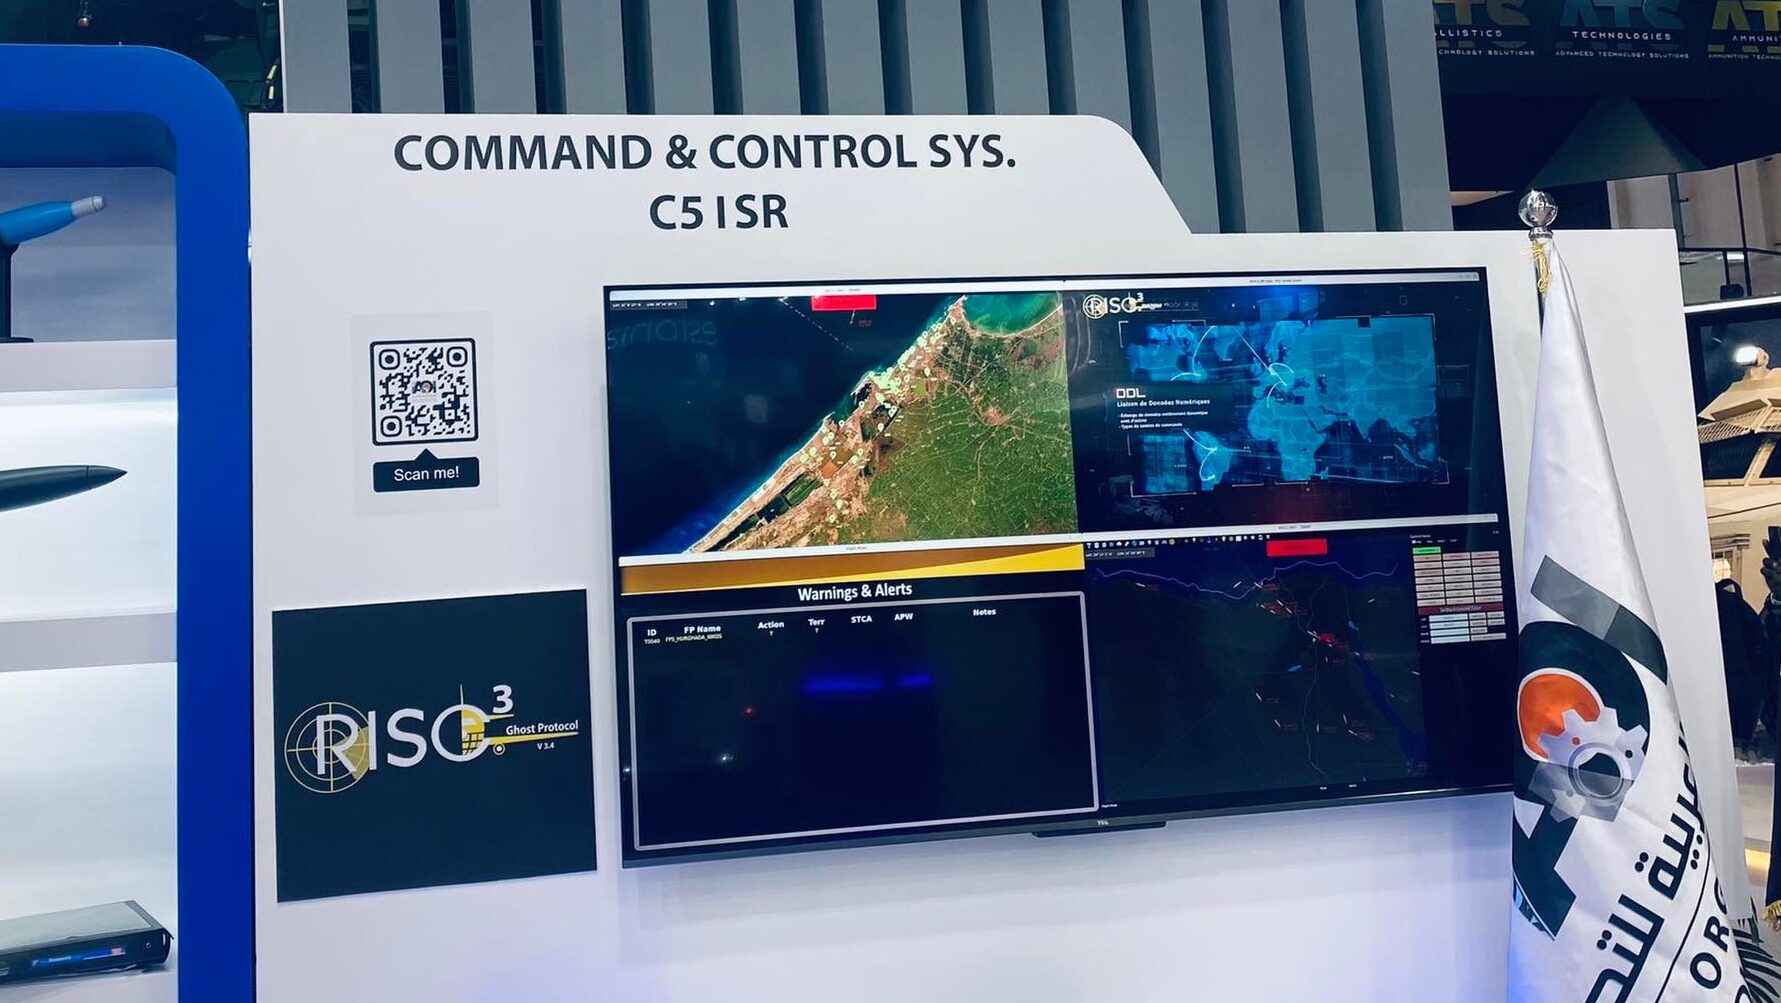 Where west and east (sensors) meet: Egyptian firm debuts mixed C5ISR system - Breaking Defense